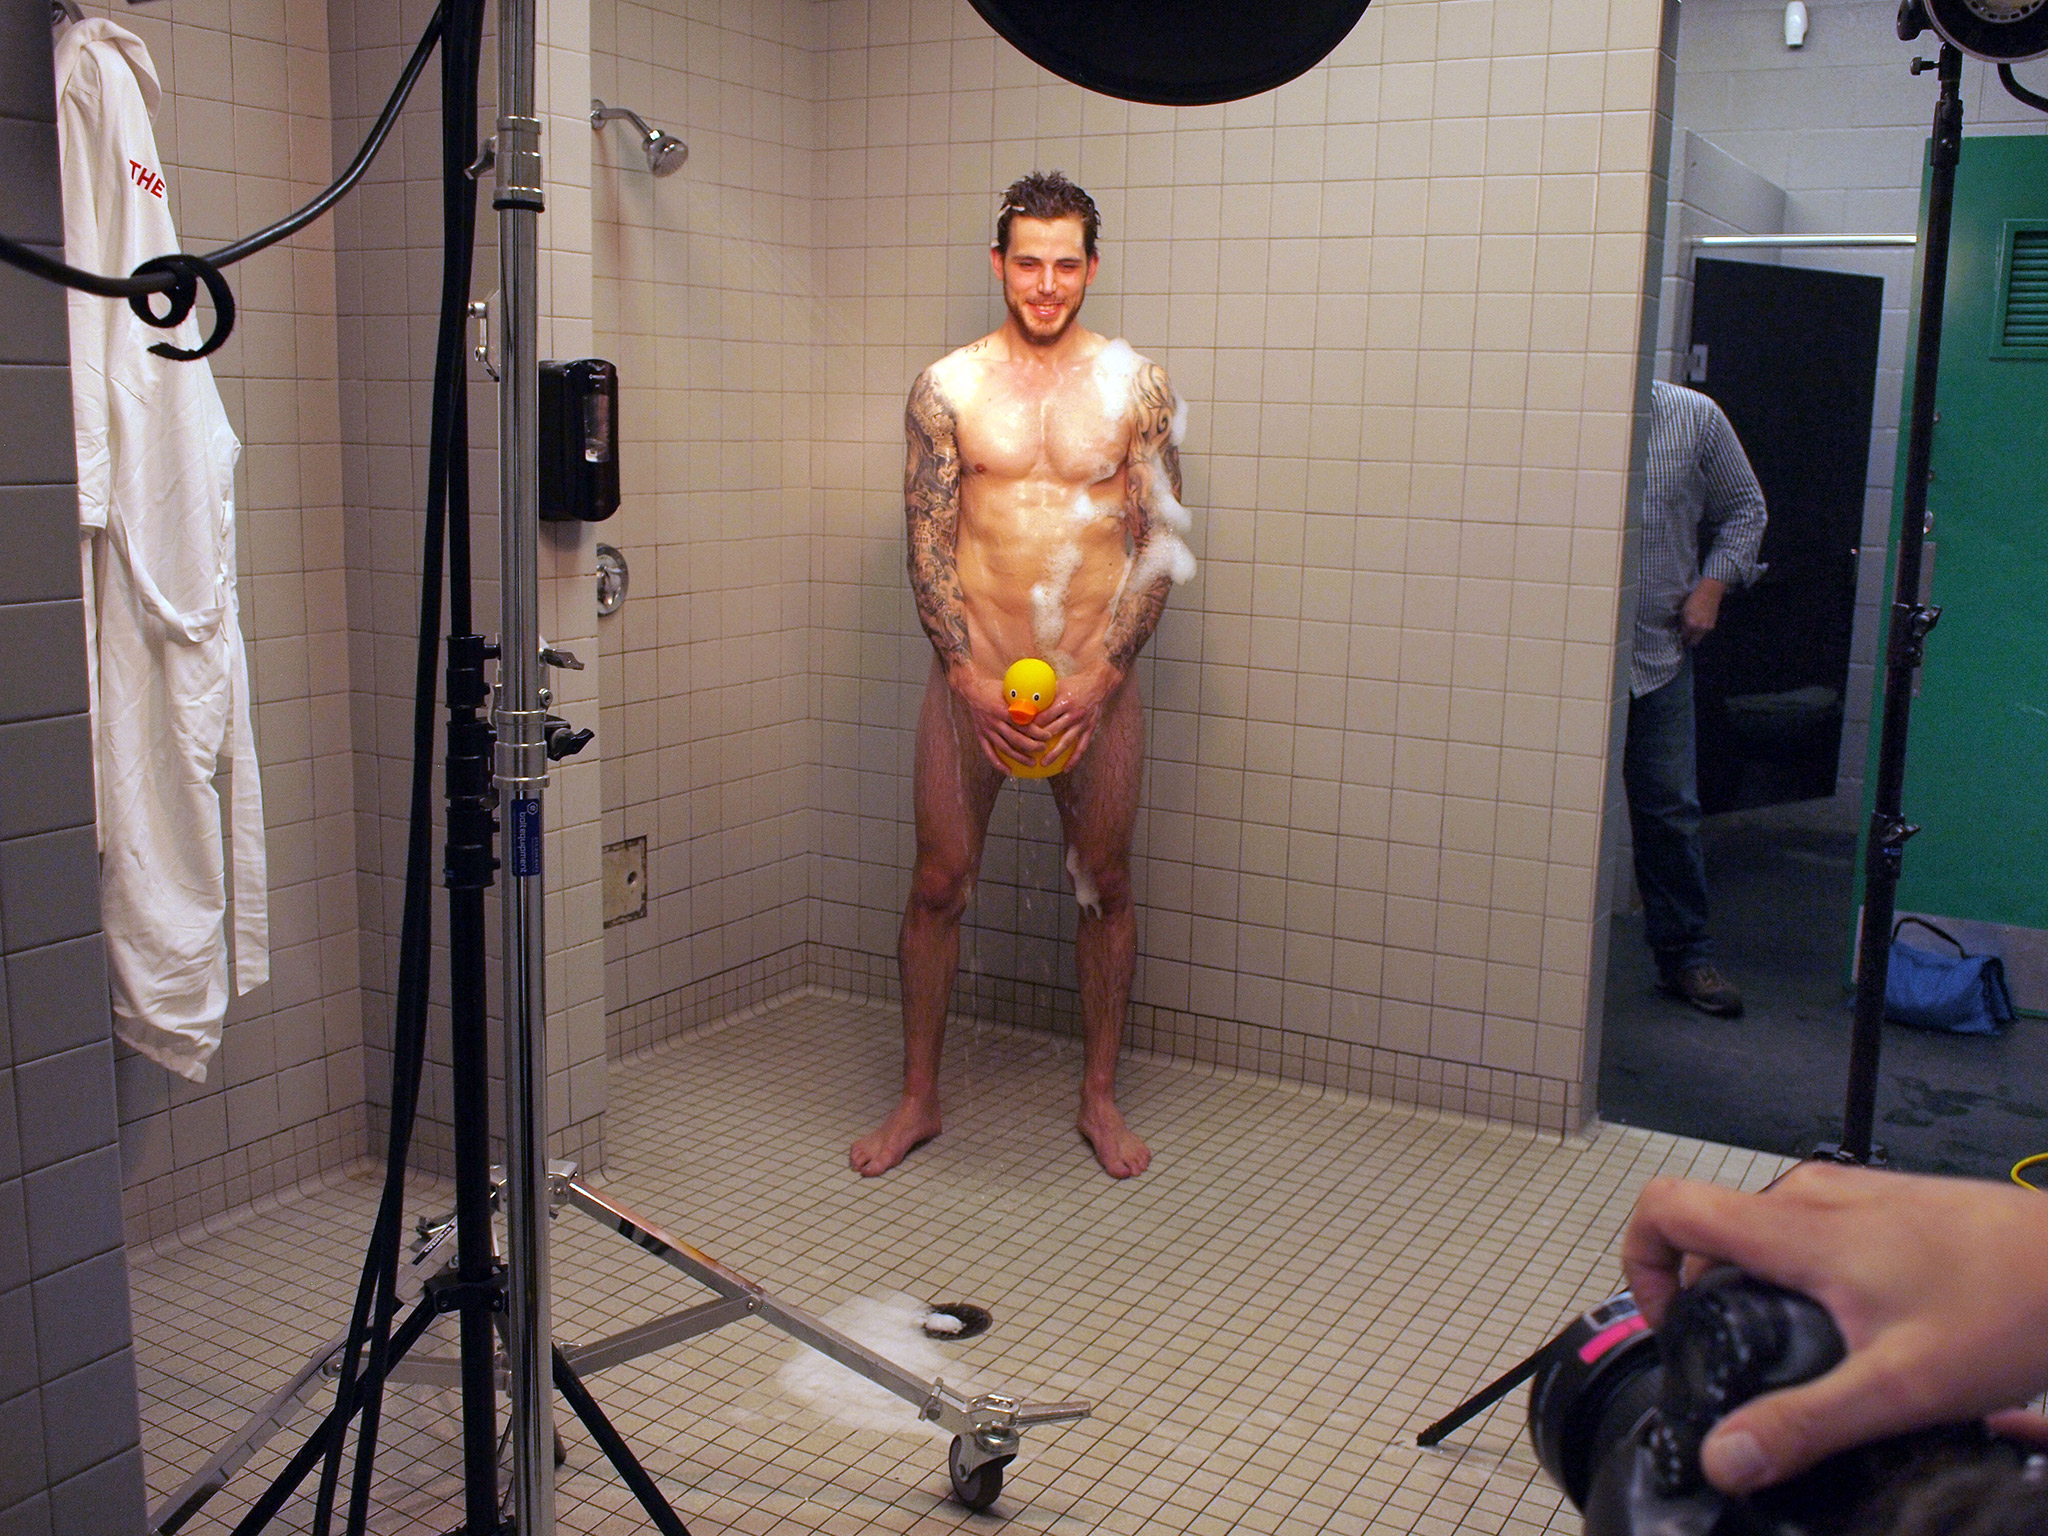 Channeling Wayne Gretzky's famed nude foam photo, Seguin, covered in f...